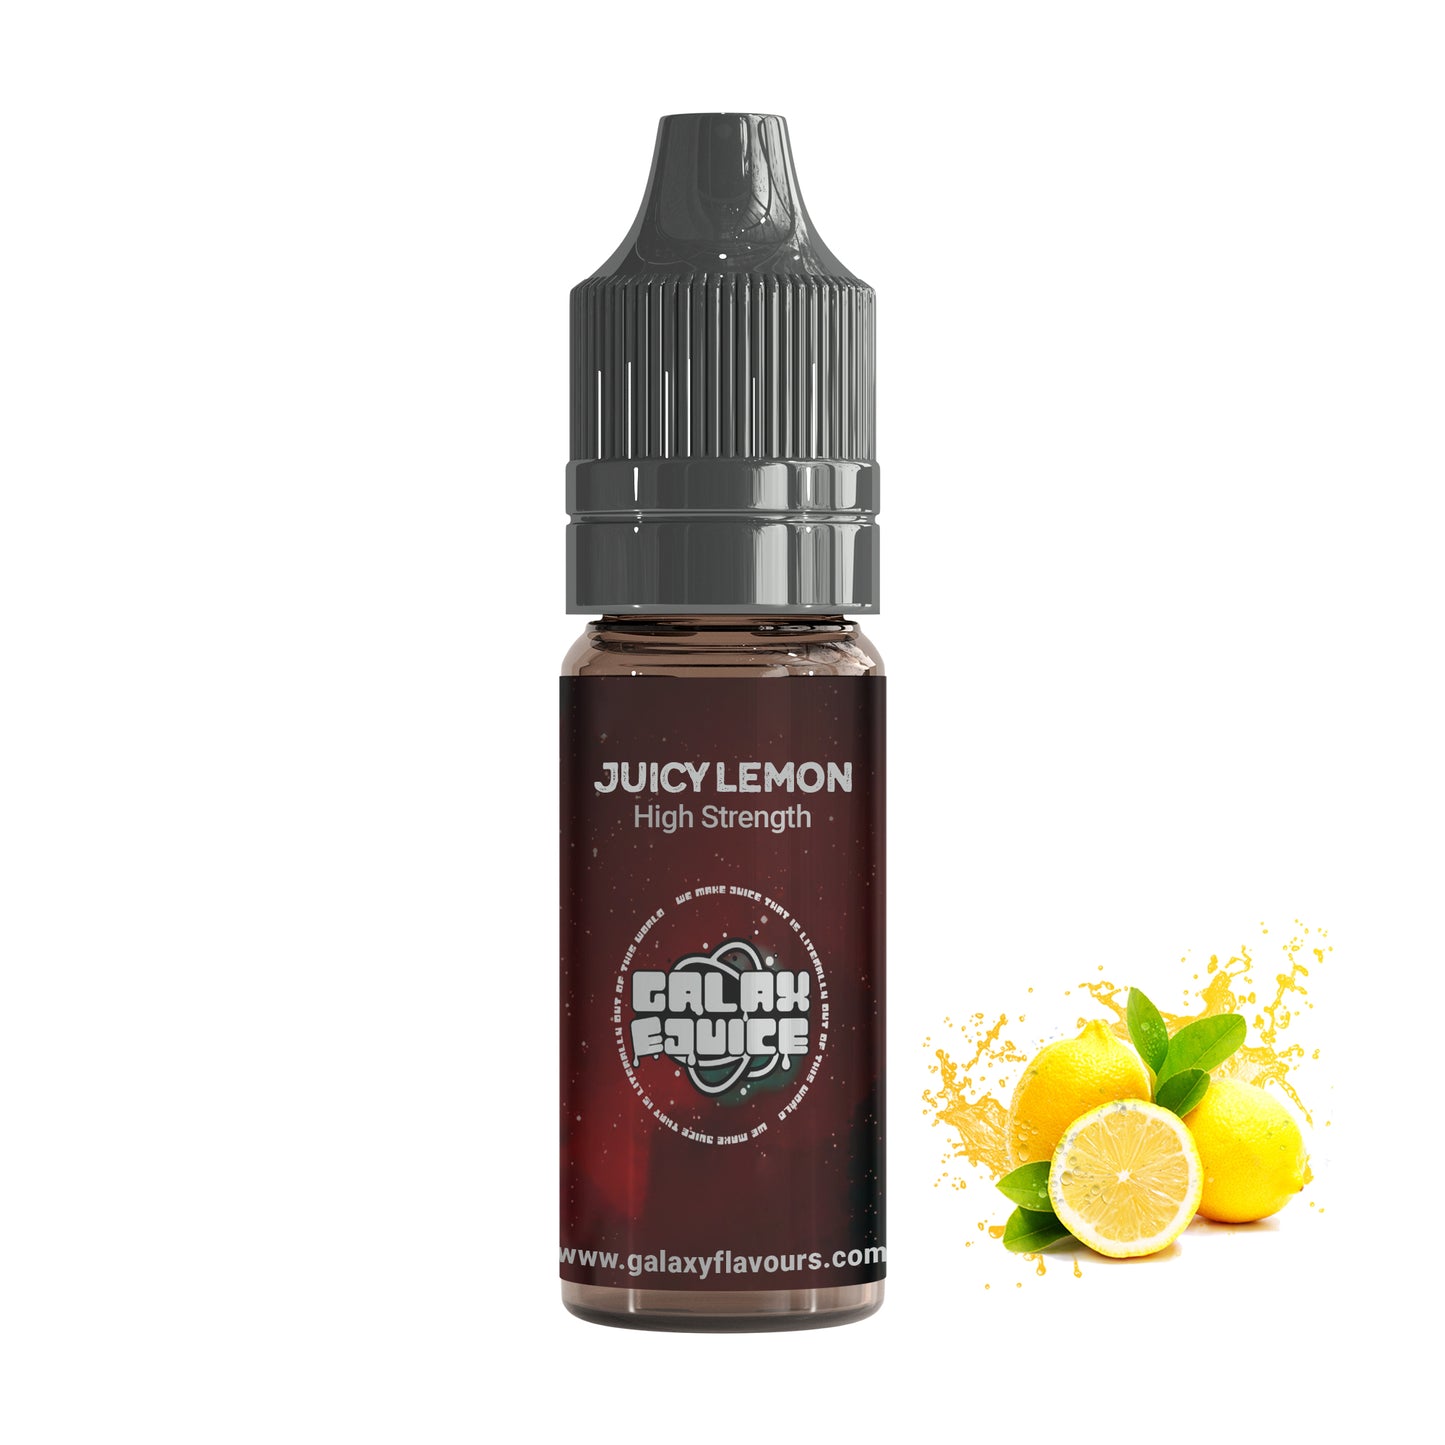 Juicy Lemon High Strength Professional Flavouring.